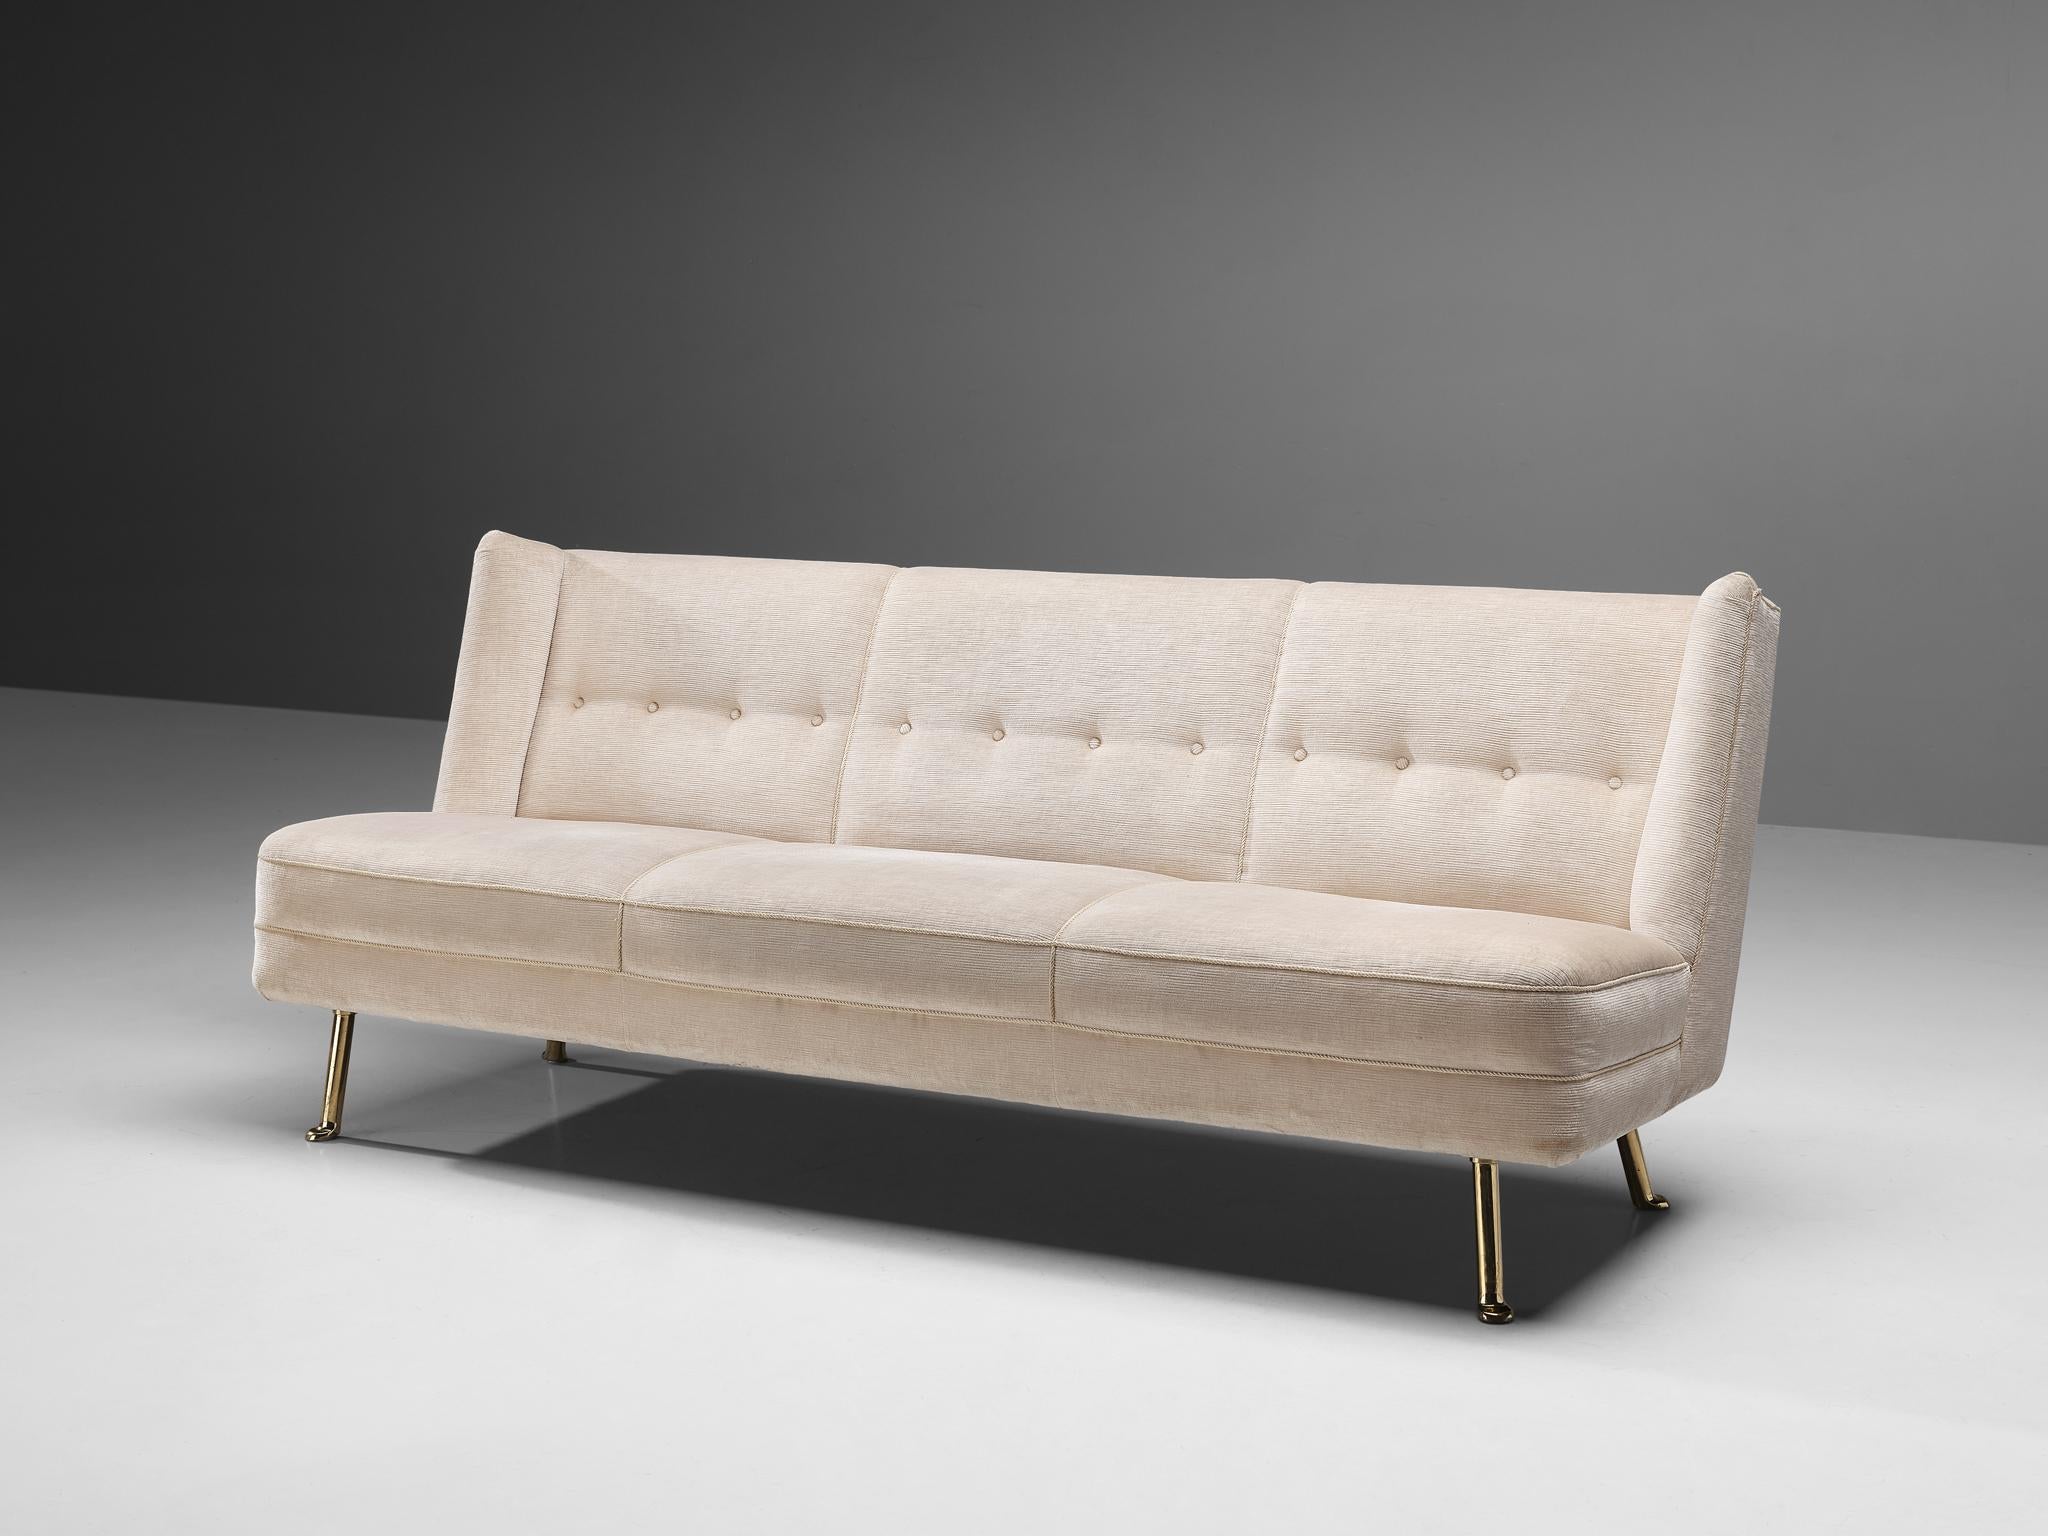 Sofa, velvet upholstery, wood Italy, 1960s

This sofa bears multiple dynamic features. The shape of the sofa is elegant due to the high backseat and graceful sides. The backseat is shaped in angled which hightens the comfort of the sofa. The small